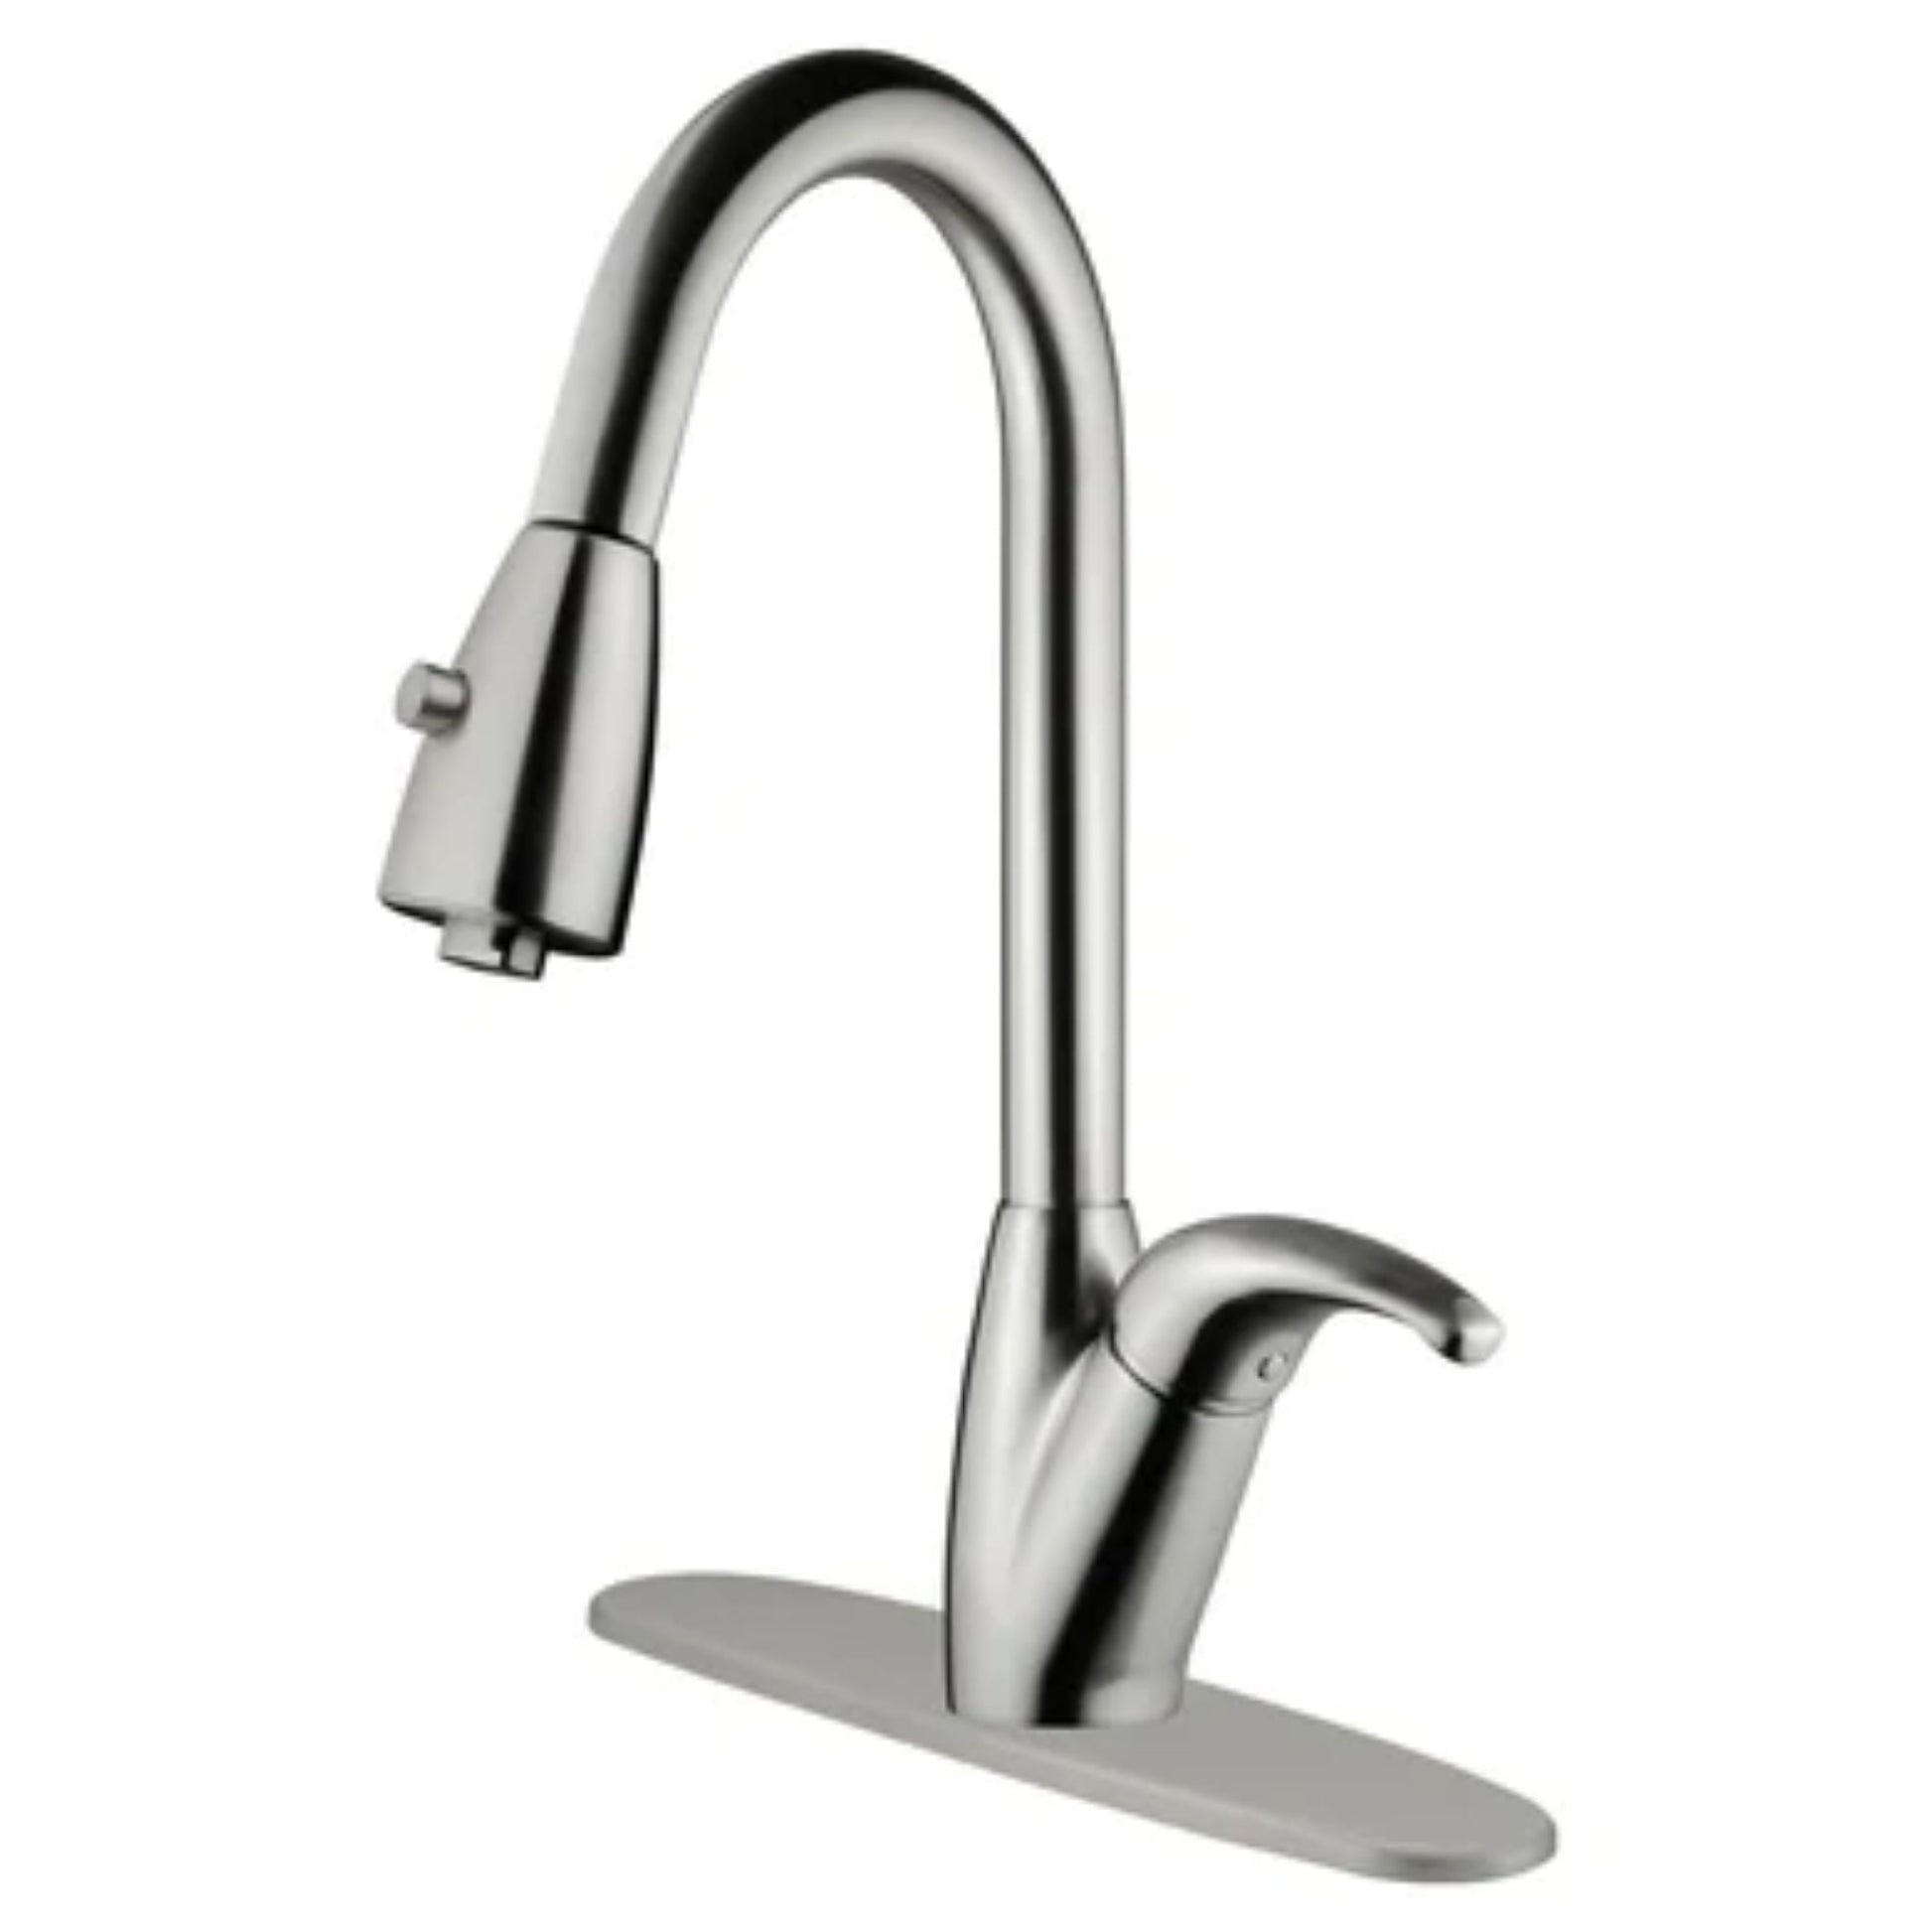 LessCare Brushed Nickel Finish Pull Out Kitchen Faucet - LK12B